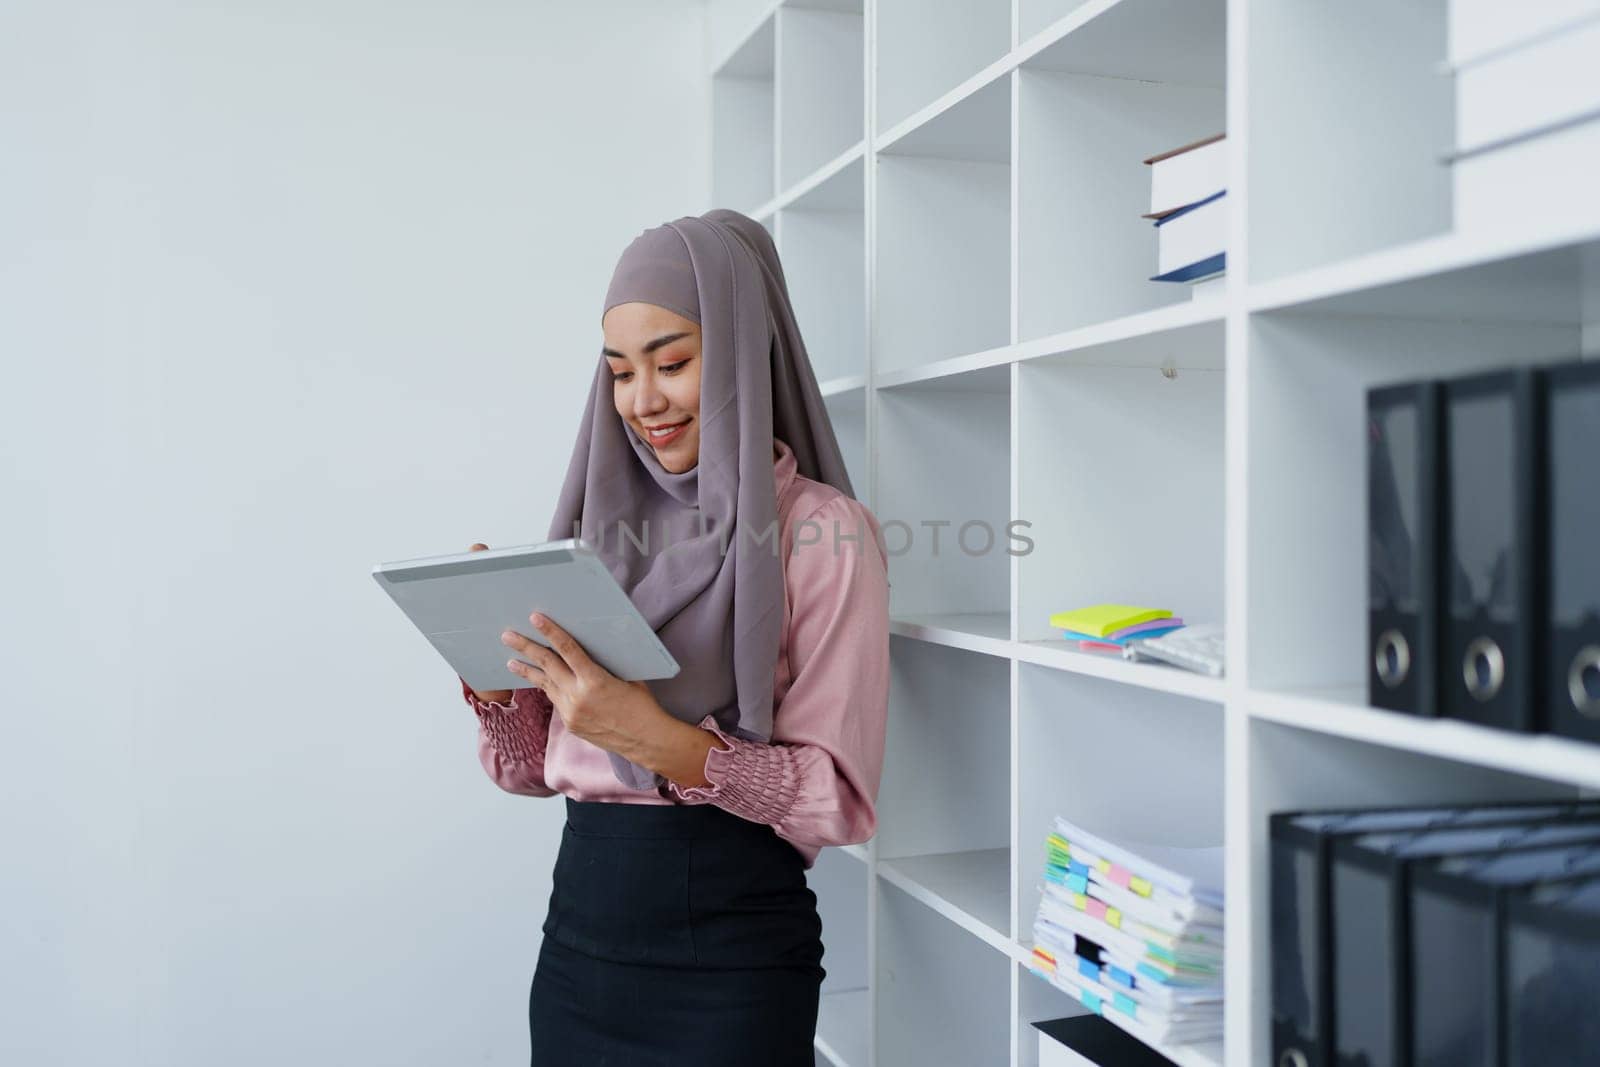 Female Muslim employee uses tablet to work at office